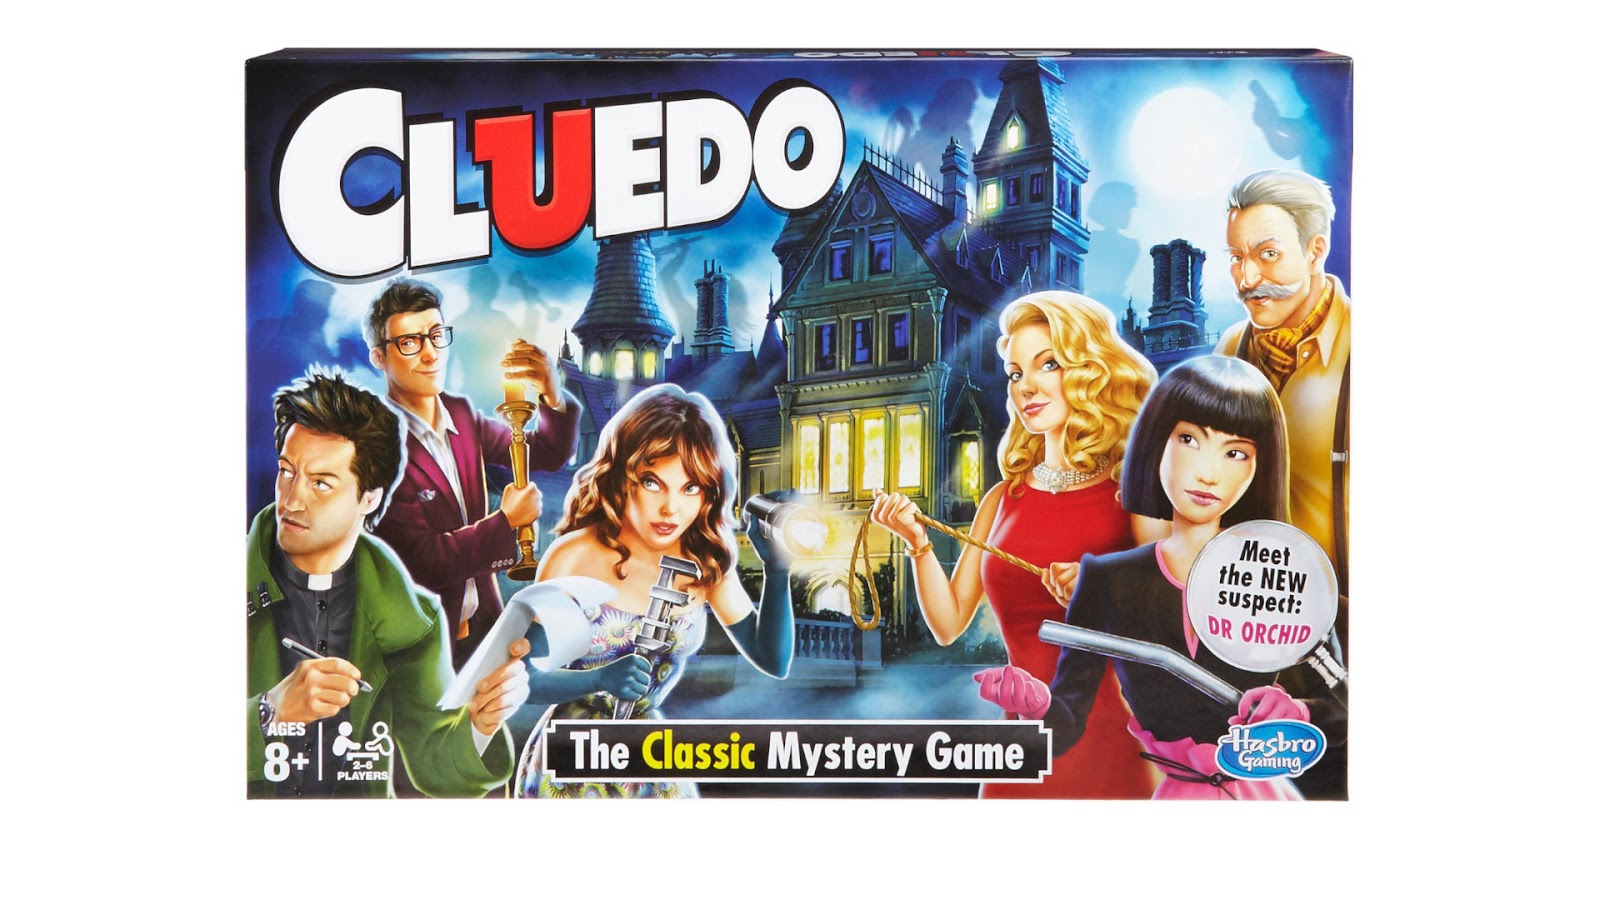 News Collider Board Game News Cludeo Removes Replaces Room Kills Character